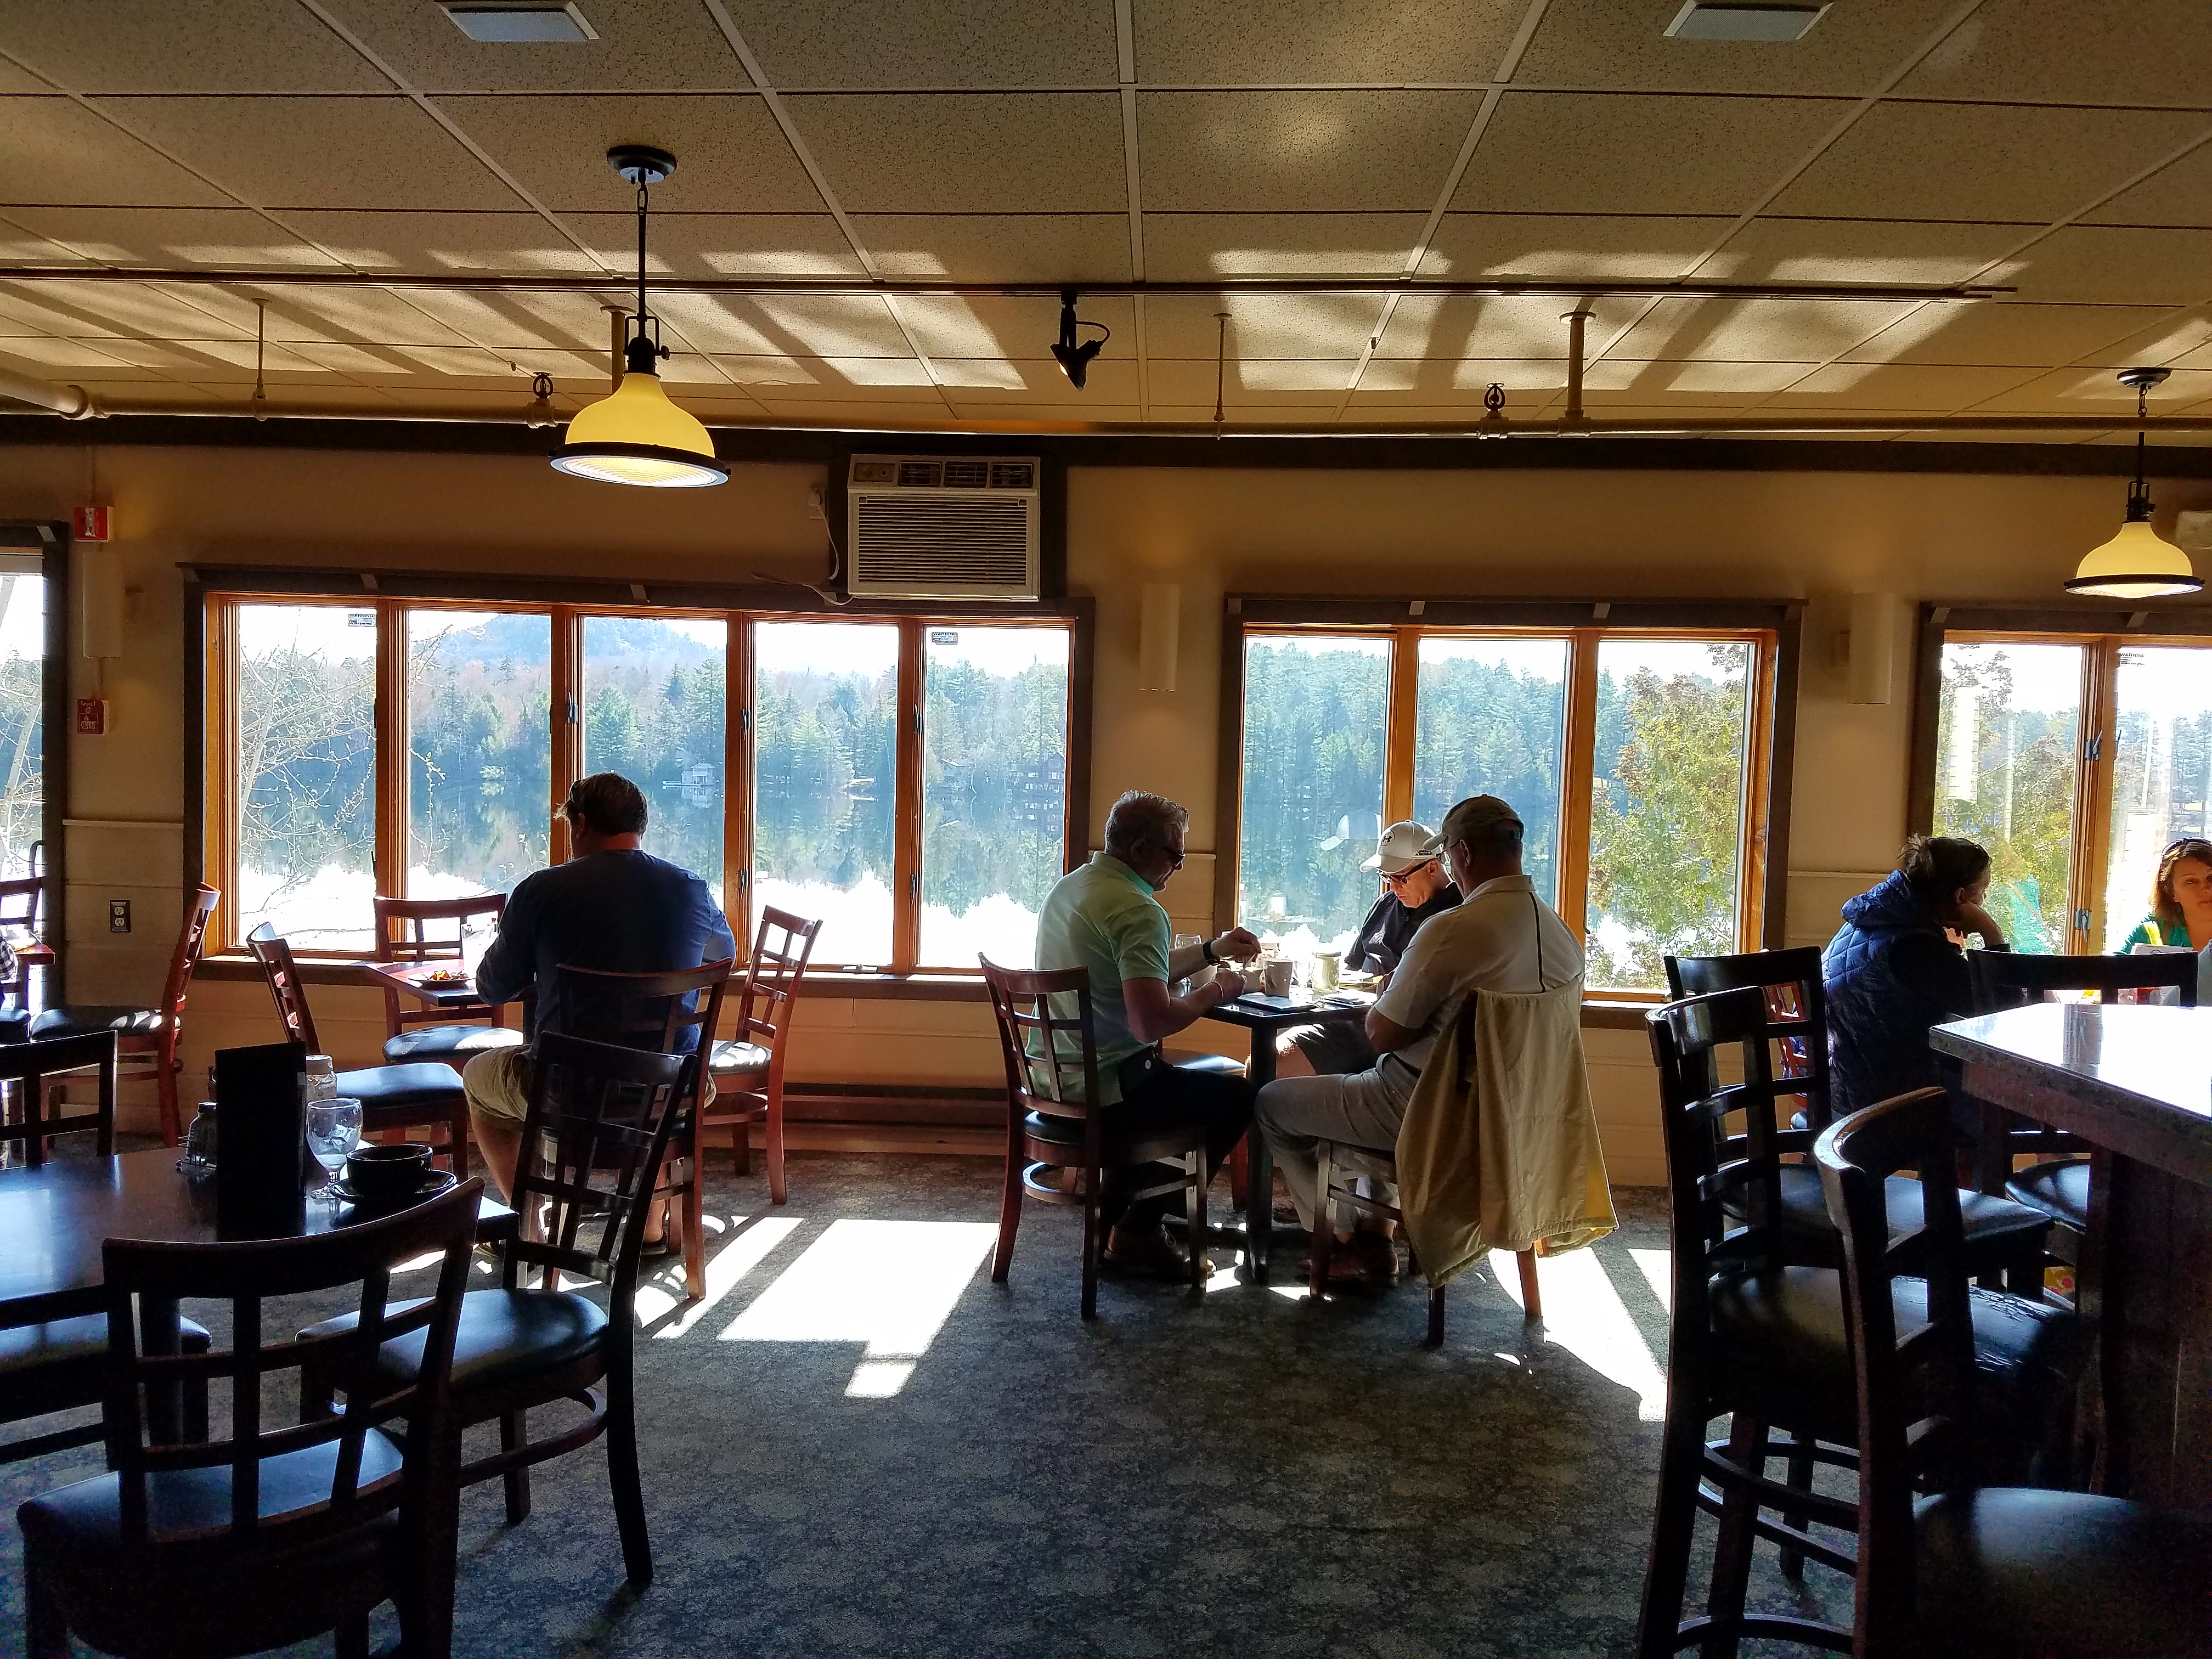 Reviews the breakfast club, etc - Restaurant in Lake Placid, NY